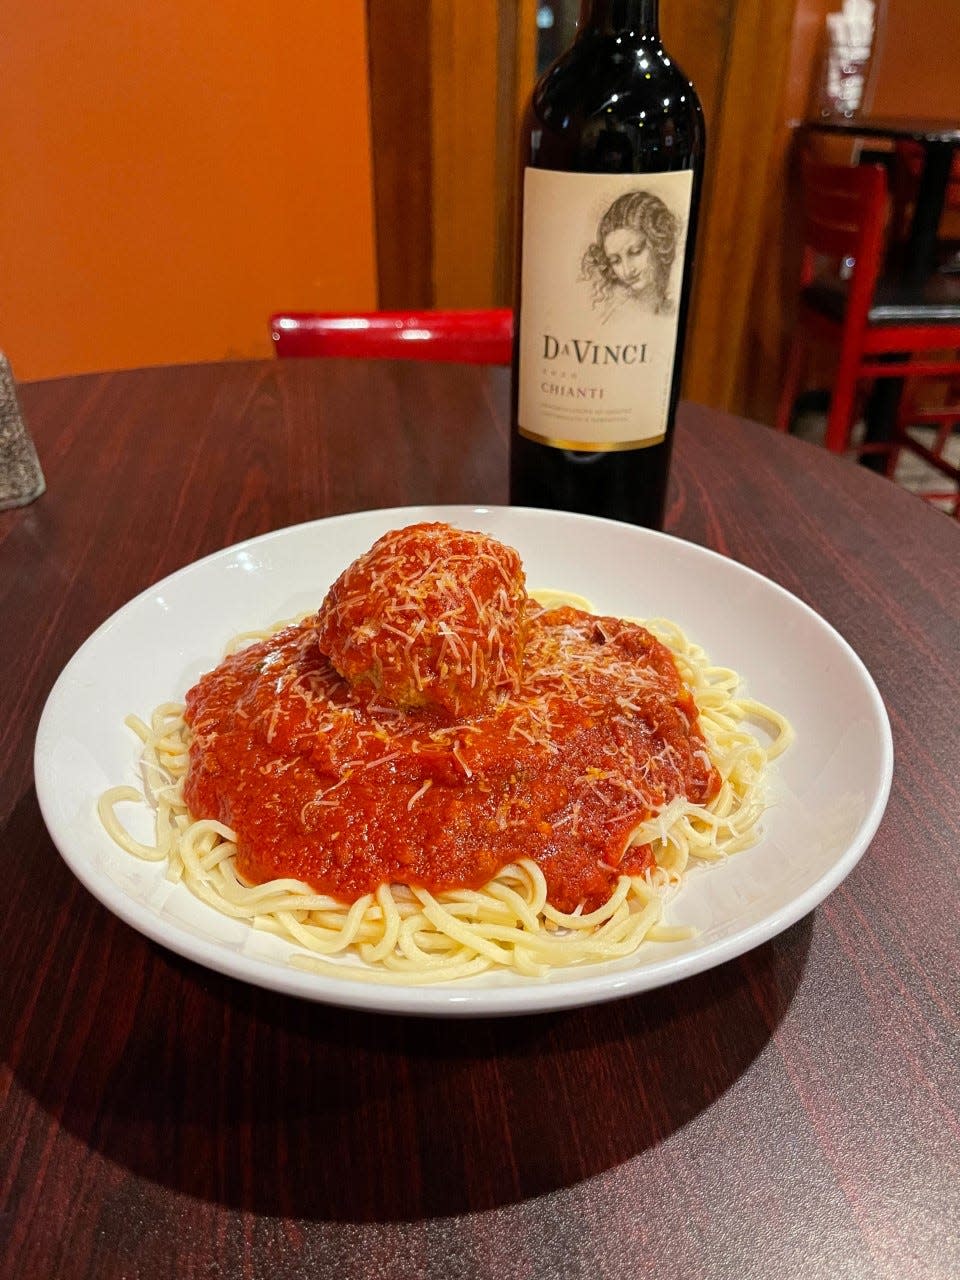 That's one big meatball! Caffe DaVinci makes most of its food from scratch, including this classic Italian favorite.